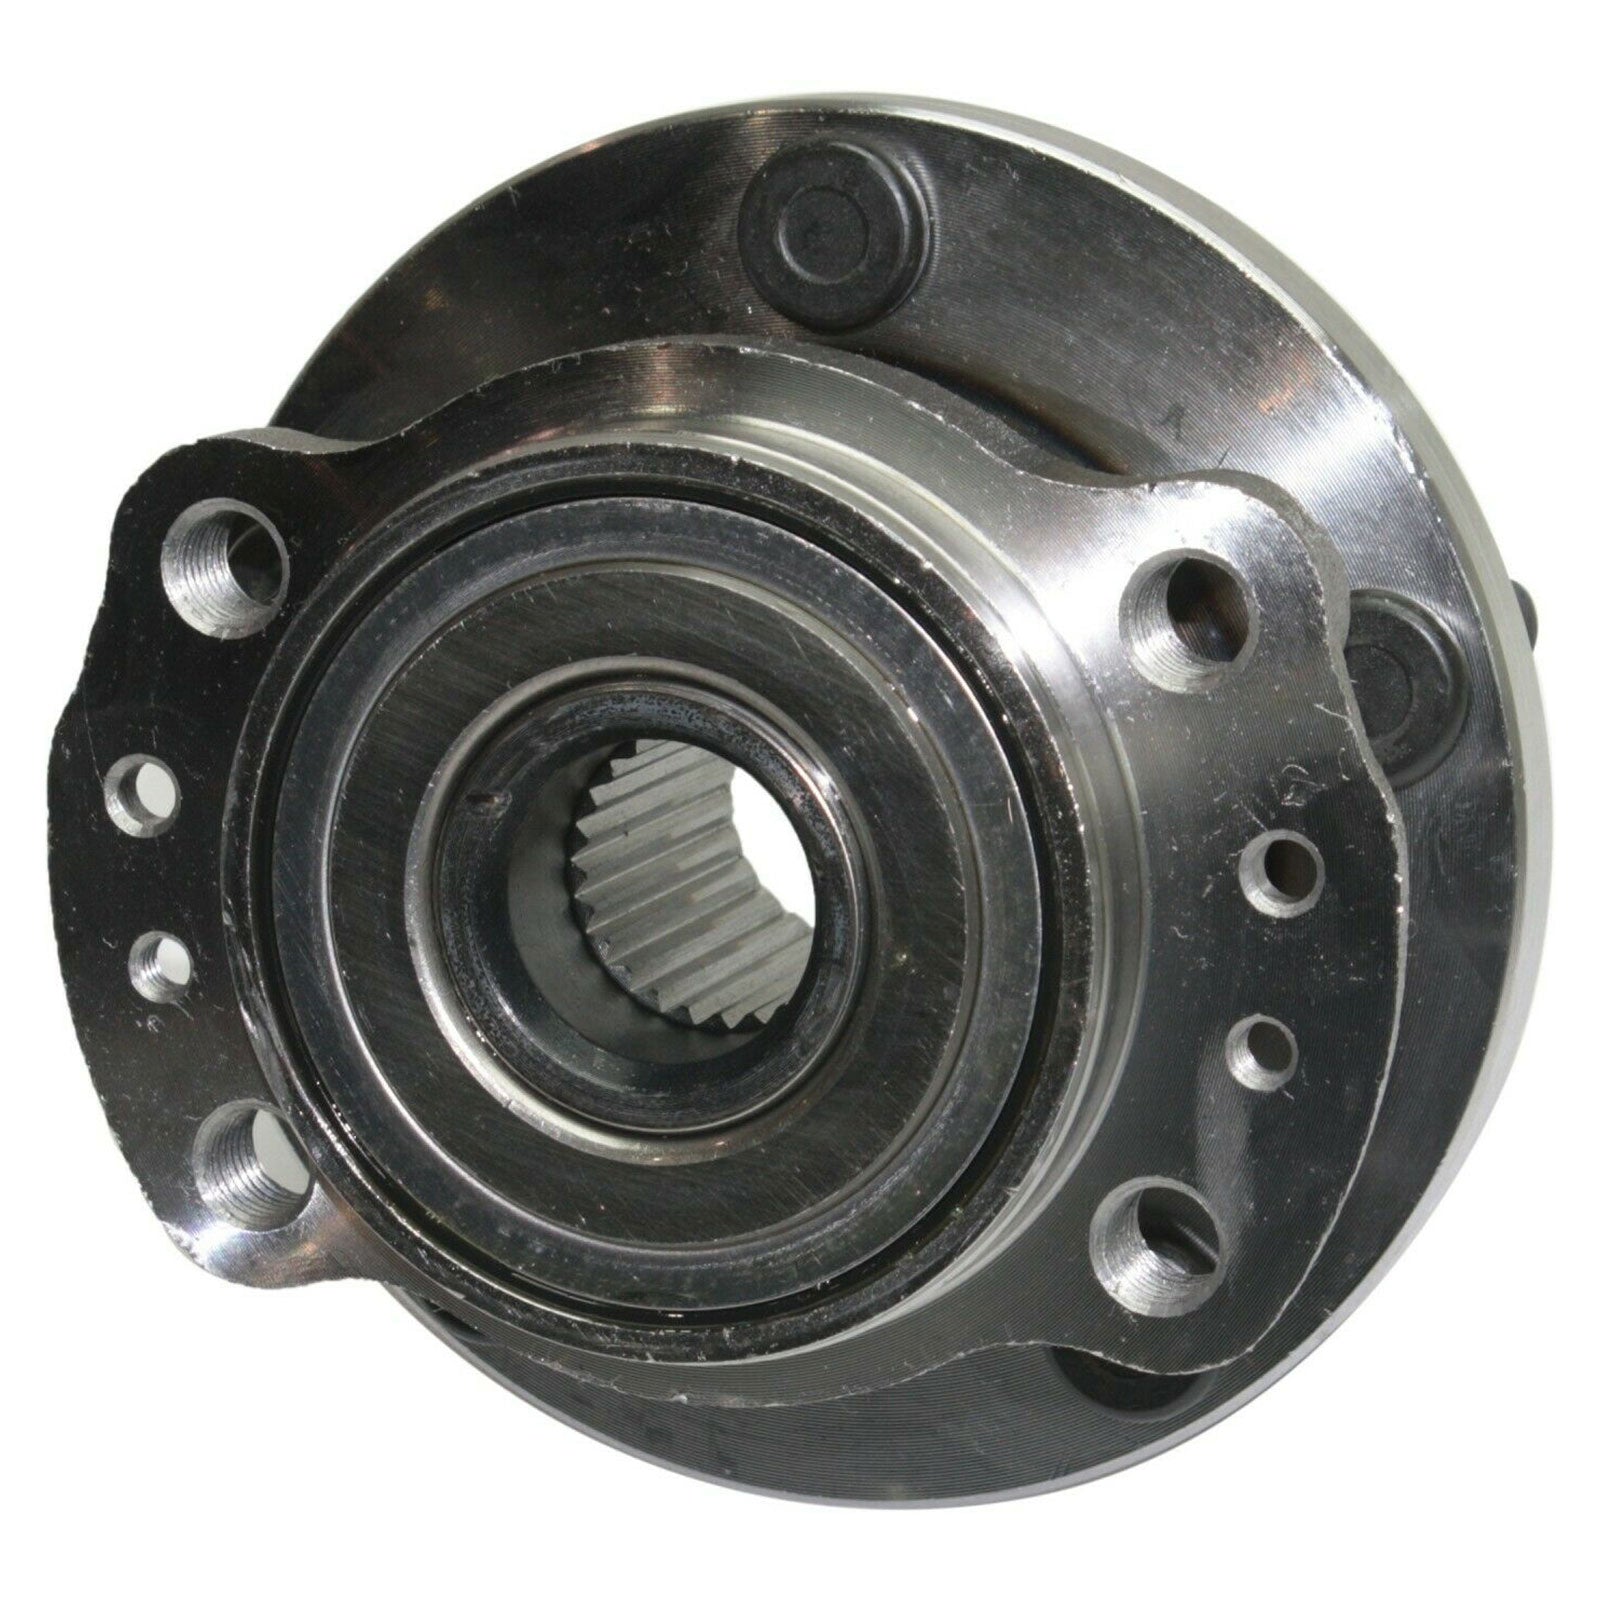 MotorbyMotor 512157 Rear Wheel Bearing Hub Assembly with 5 Lugs, Chrysler Town & Country, Dodge Grand Caravan Low-Runout OE Directly Replacement MotorbyMotor